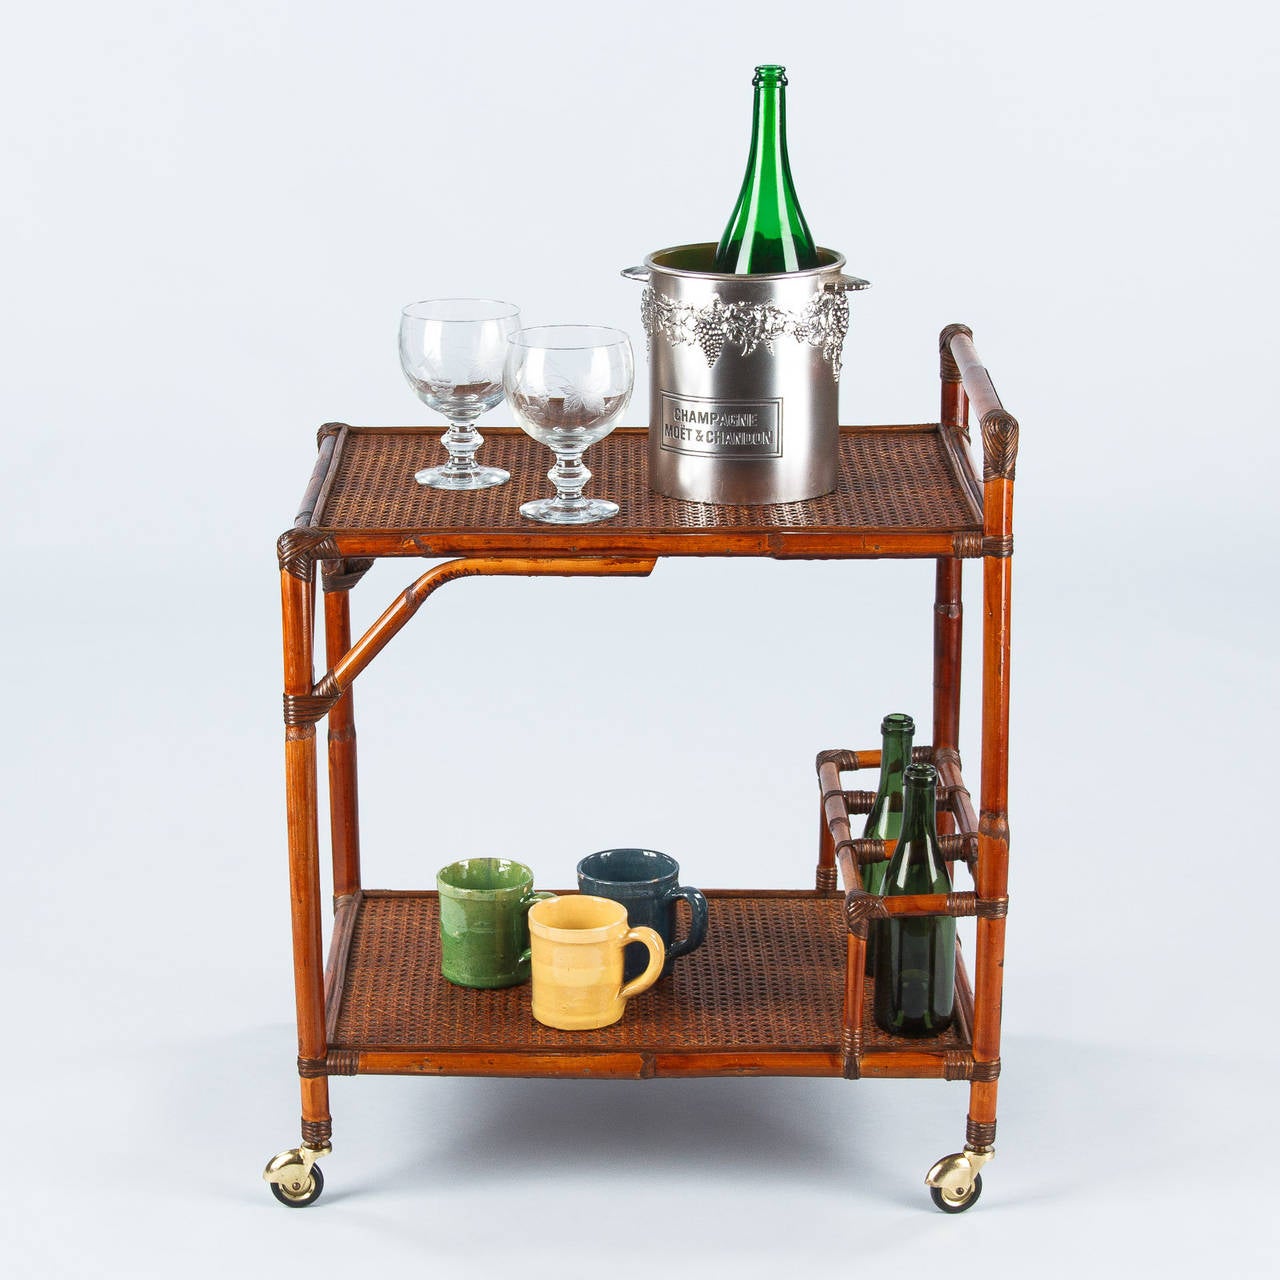 A nice bamboo bar cart with caned tops made in the French Colonial style, circa 1920s. The bottom shelf features a three-bottle holder and the cart rolls on brass casters with rubber wheels.